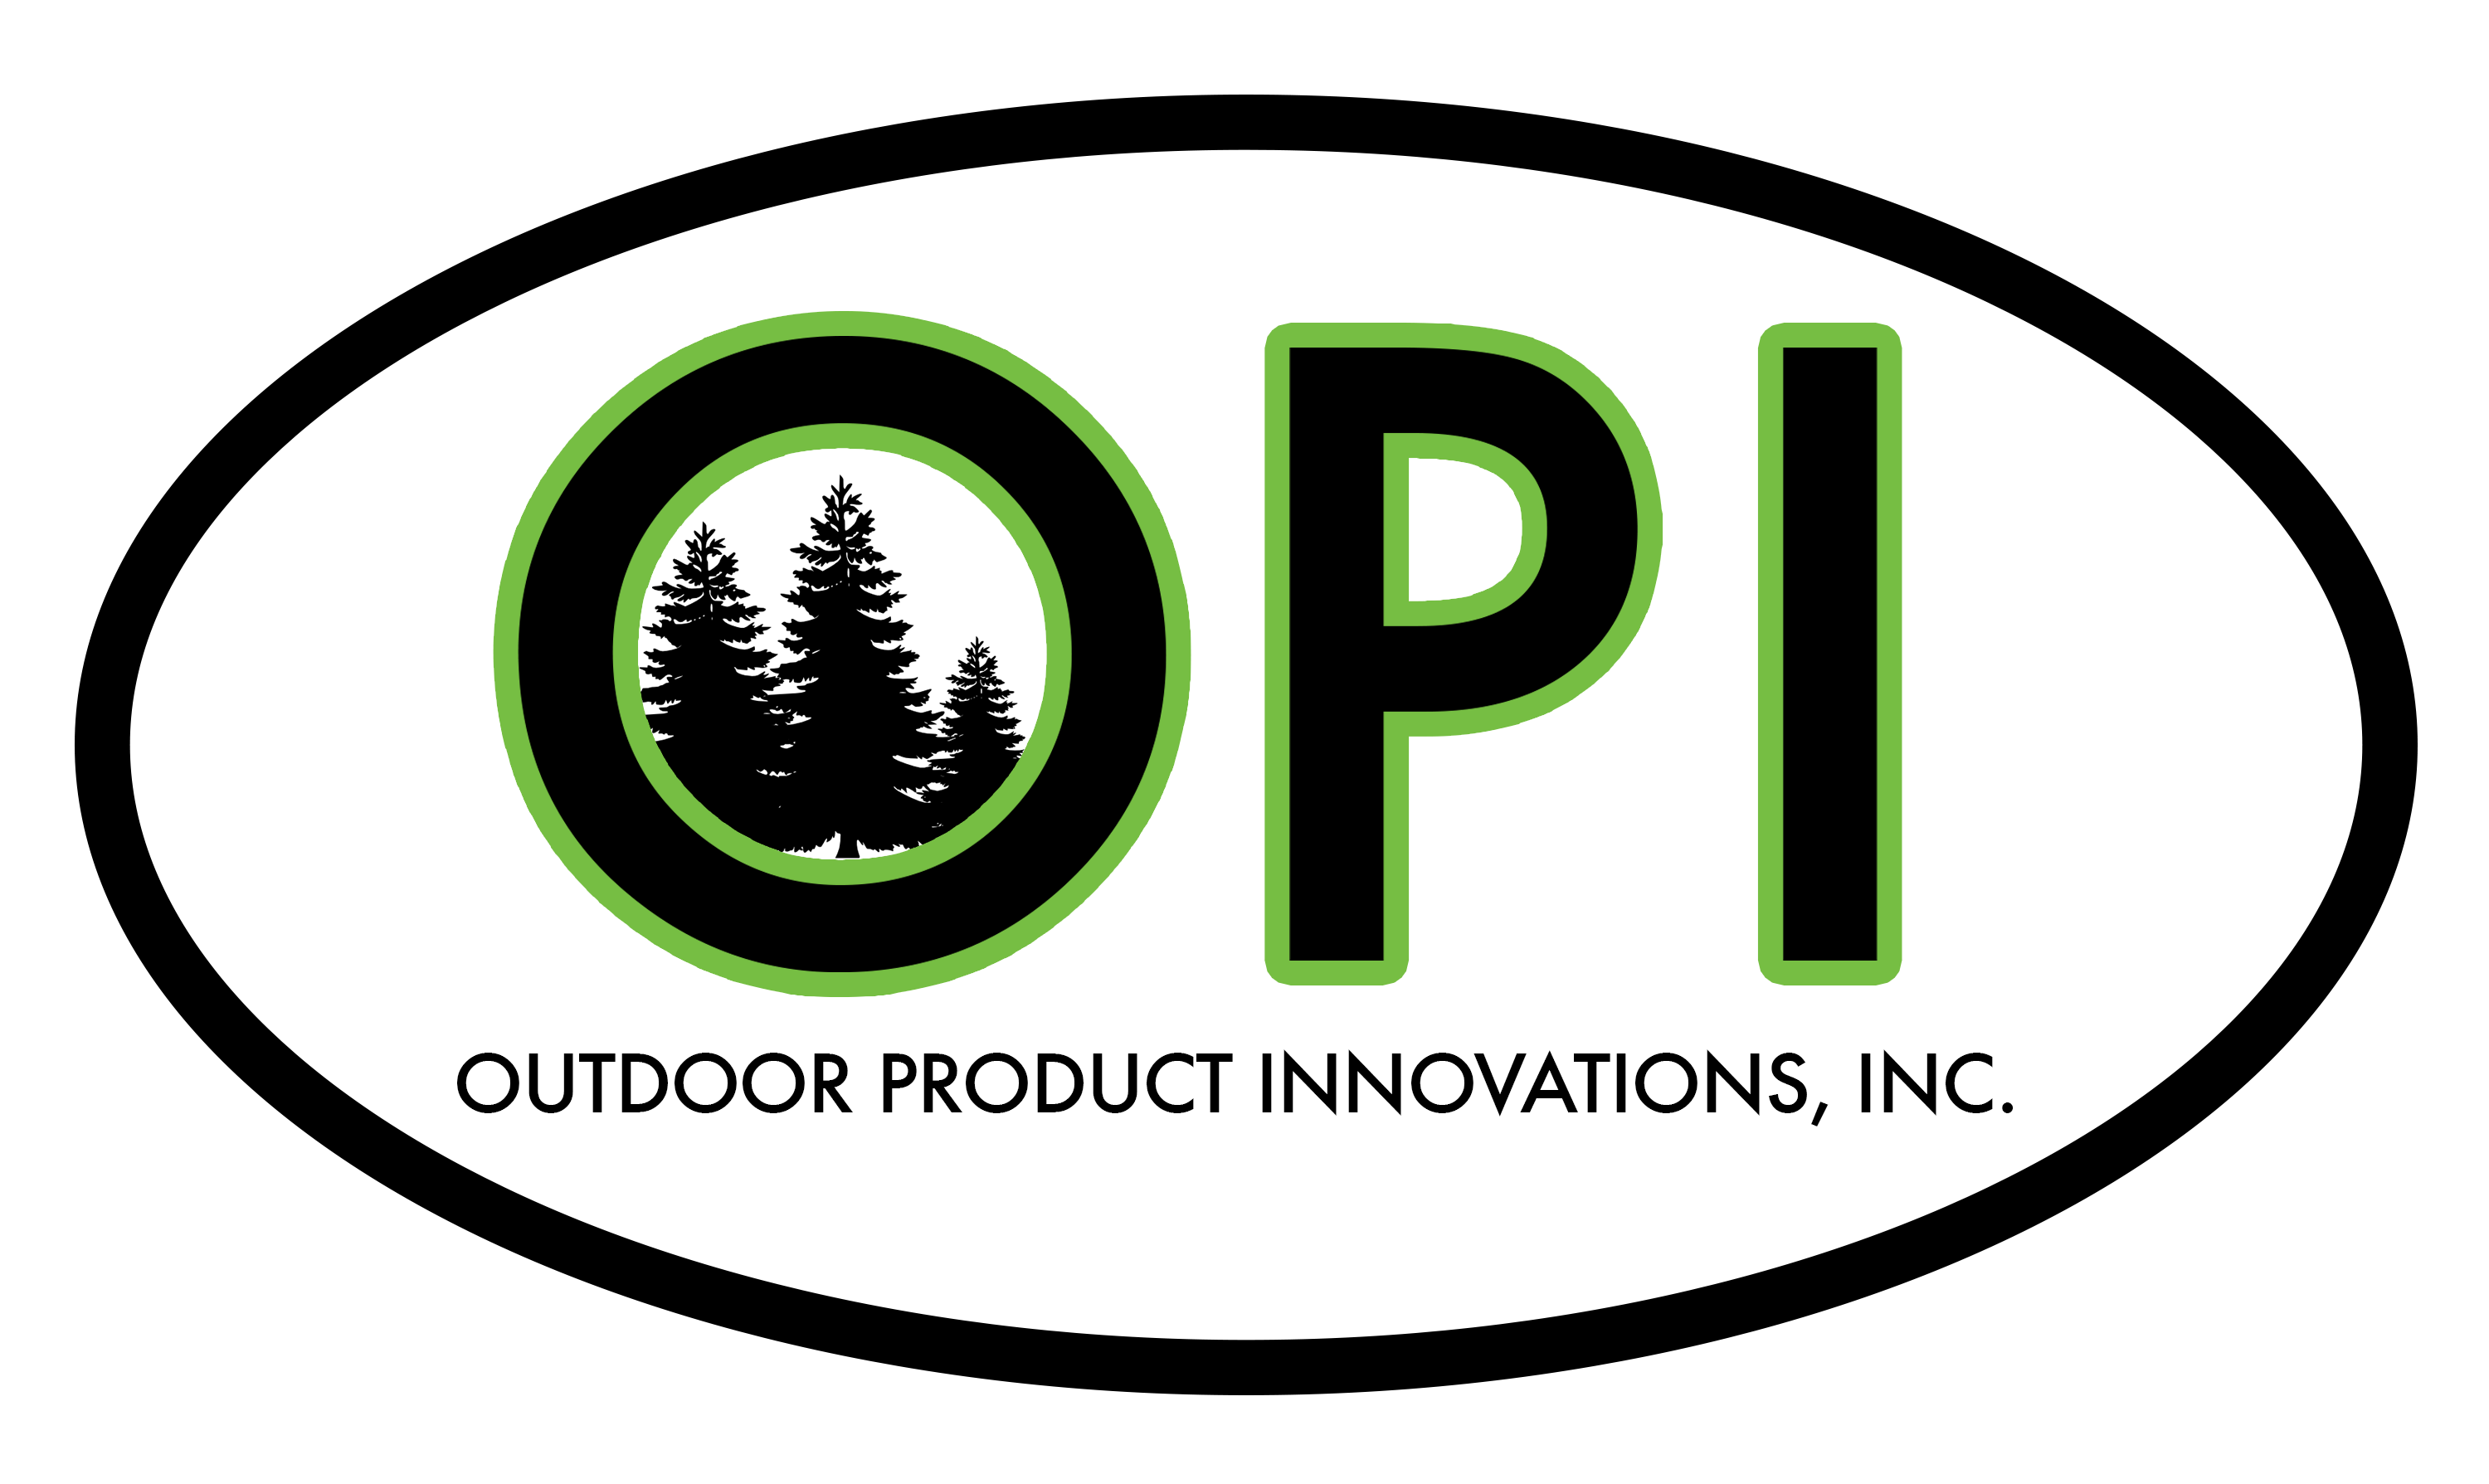 Outdoor Product Innov